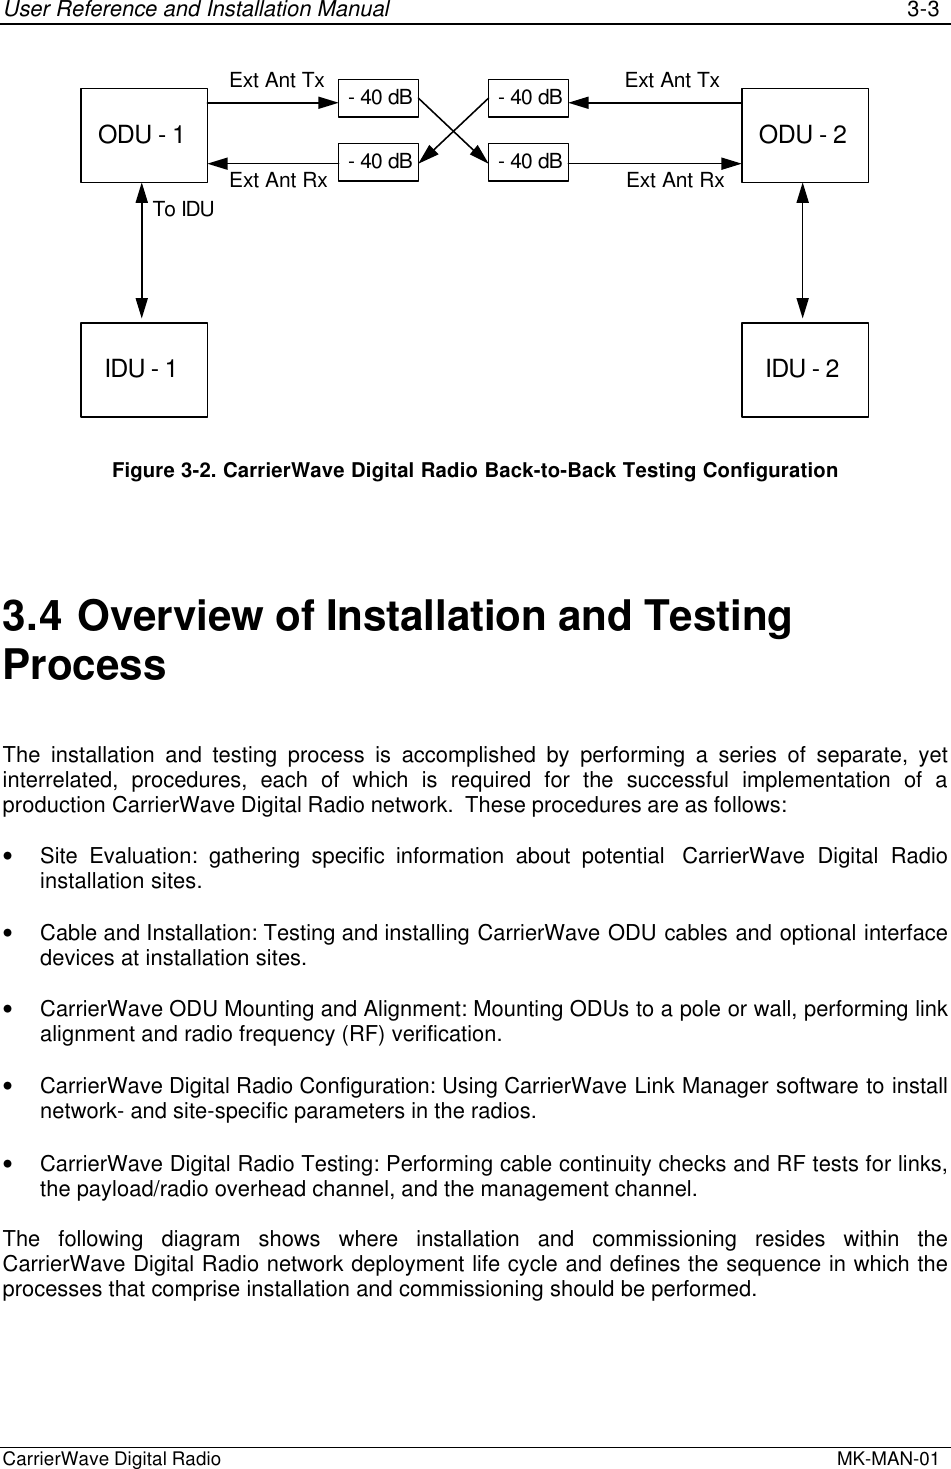 User Reference and Installation Manual 3-3CarrierWave Digital Radio  MK-MAN-01ODU - 1IDU - 1To IDUExt Ant TxExt Ant RxODU - 2IDU - 2Ext Ant TxExt Ant Rx- 40 dB- 40 dB - 40 dB- 40 dBFigure 3-2. CarrierWave Digital Radio Back-to-Back Testing Configuration3.4 Overview of Installation and TestingProcessThe installation and testing process is accomplished by performing a series of separate, yetinterrelated, procedures, each of which is required for the successful implementation of aproduction CarrierWave Digital Radio network.  These procedures are as follows:• Site Evaluation: gathering specific information about potential  CarrierWave Digital Radioinstallation sites.• Cable and Installation: Testing and installing CarrierWave ODU cables and optional interfacedevices at installation sites.• CarrierWave ODU Mounting and Alignment: Mounting ODUs to a pole or wall, performing linkalignment and radio frequency (RF) verification.• CarrierWave Digital Radio Configuration: Using CarrierWave Link Manager software to installnetwork- and site-specific parameters in the radios.• CarrierWave Digital Radio Testing: Performing cable continuity checks and RF tests for links,the payload/radio overhead channel, and the management channel.The following diagram shows where installation and commissioning resides within theCarrierWave Digital Radio network deployment life cycle and defines the sequence in which theprocesses that comprise installation and commissioning should be performed.